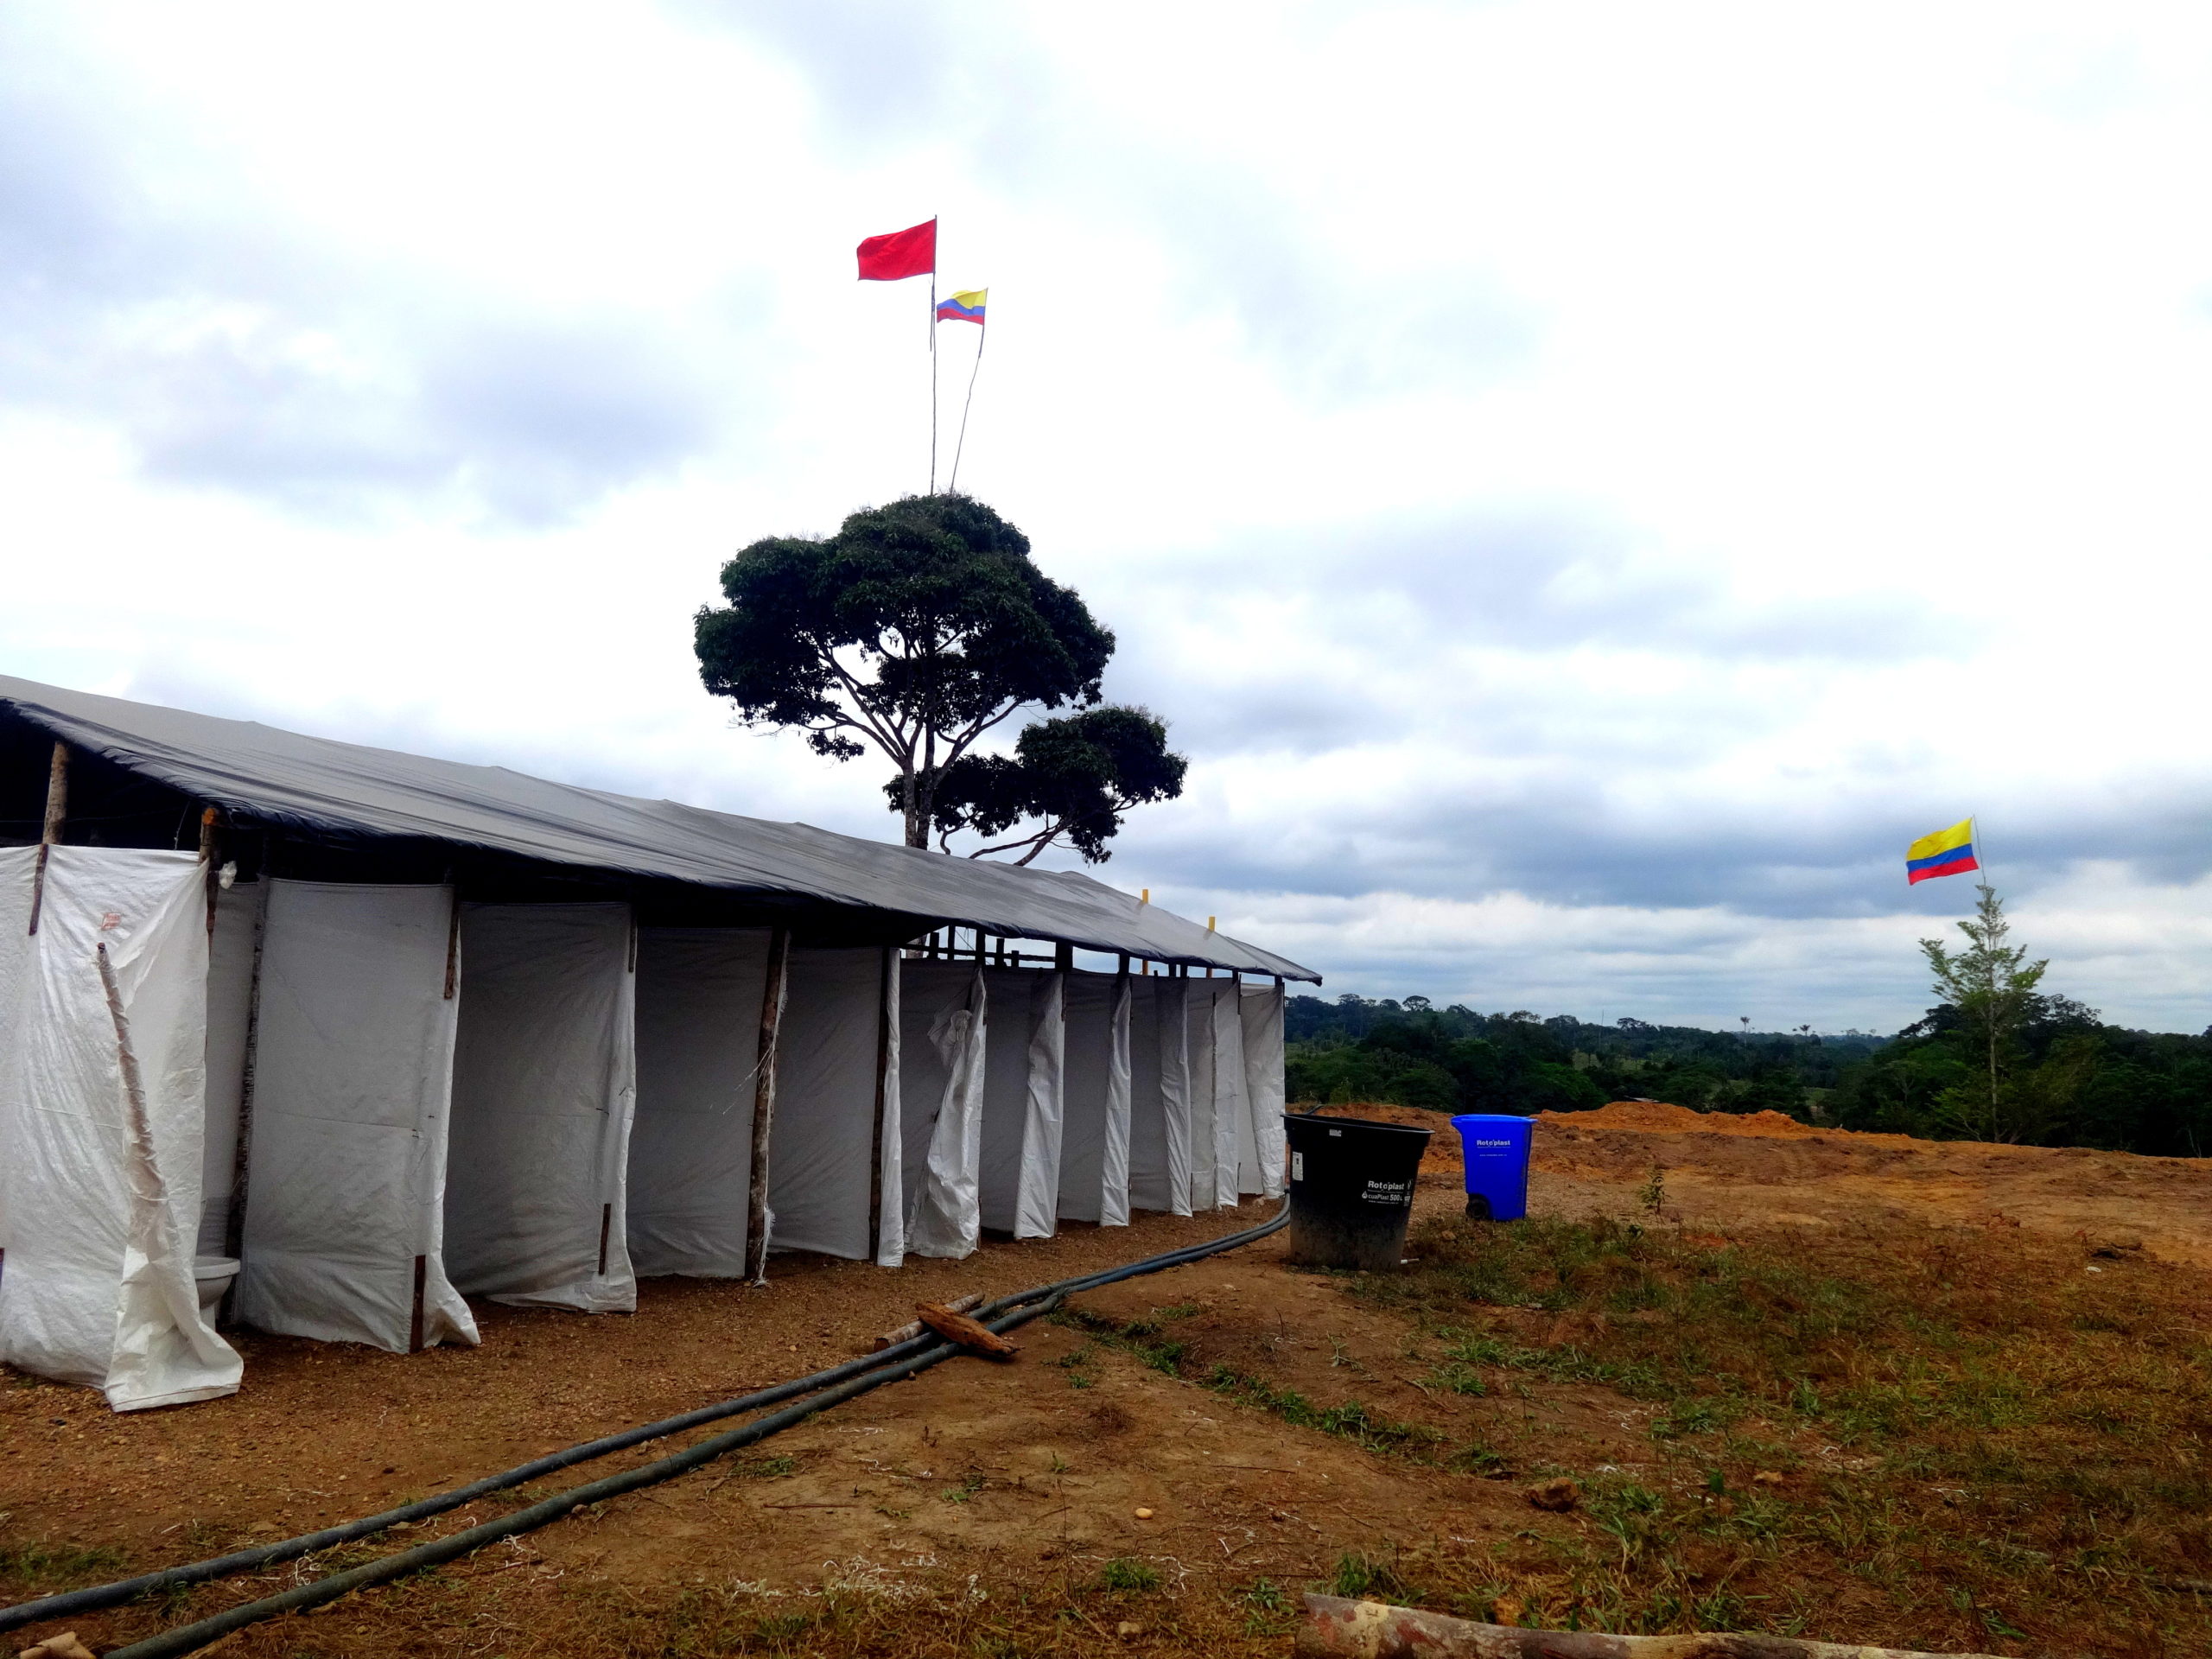 Photograph of temporary showers built in a disarmament camp in Colombia.